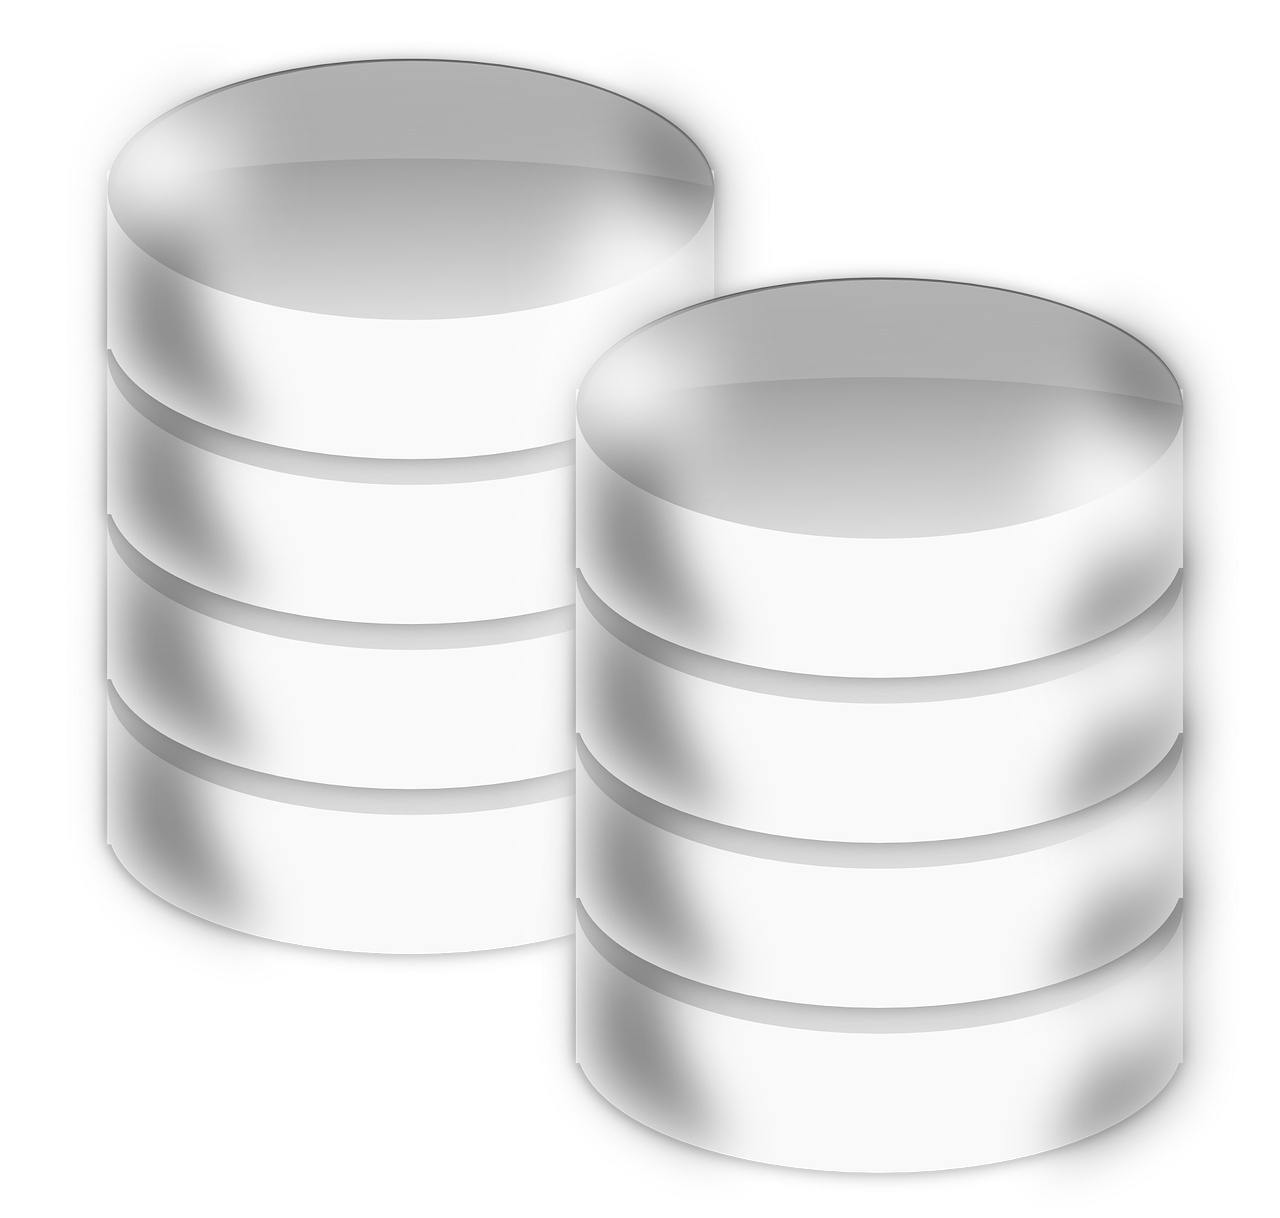 Image showing a representation of databases